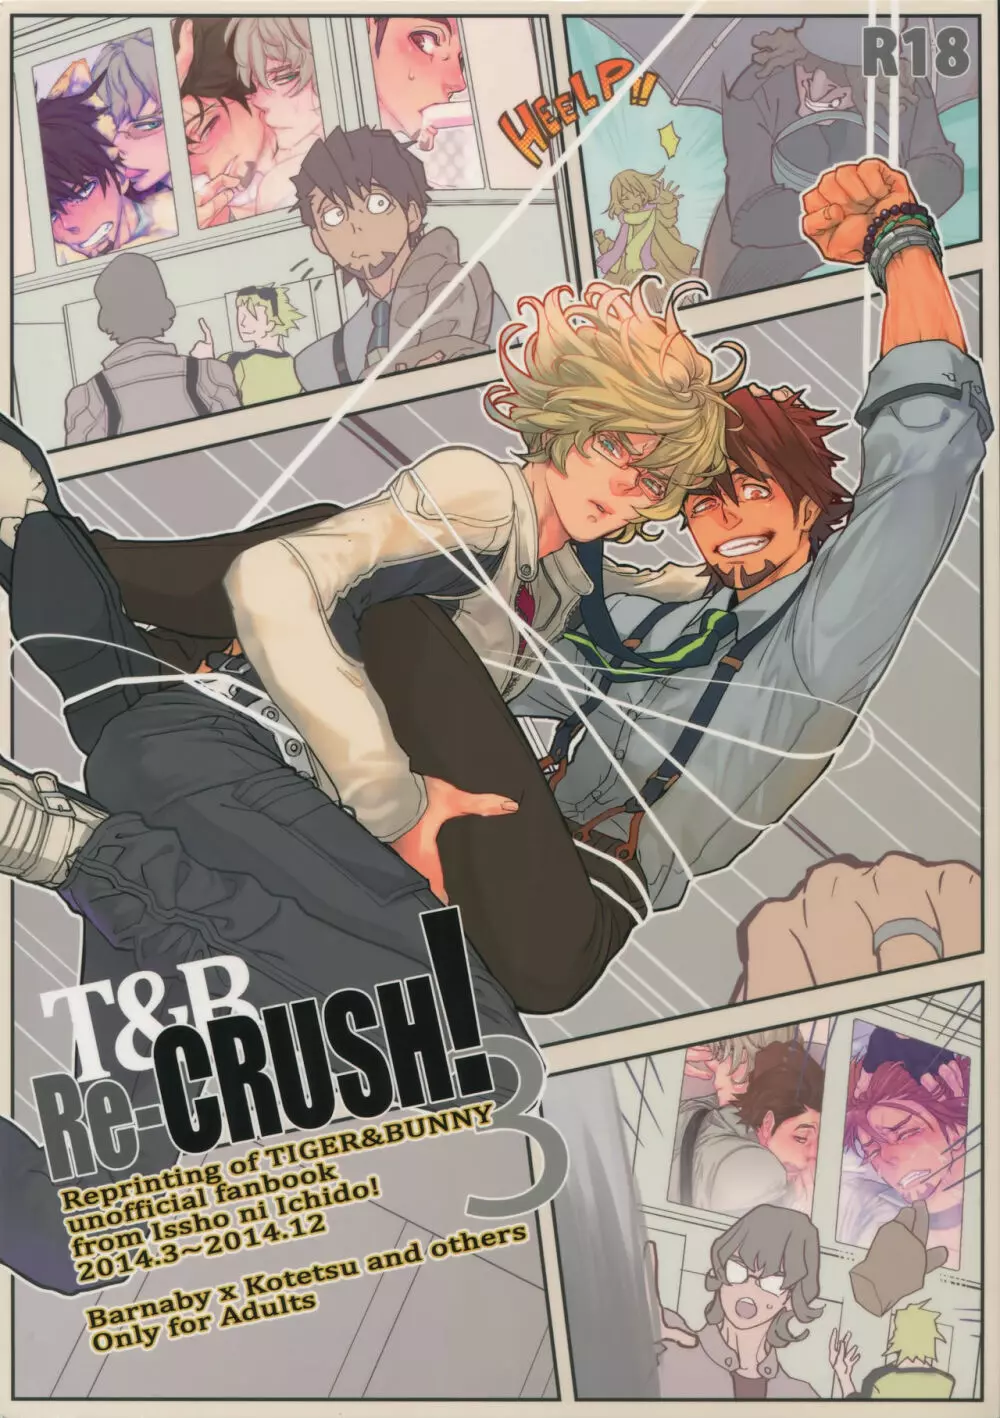 T&B Re-CRUSH!3 - page1